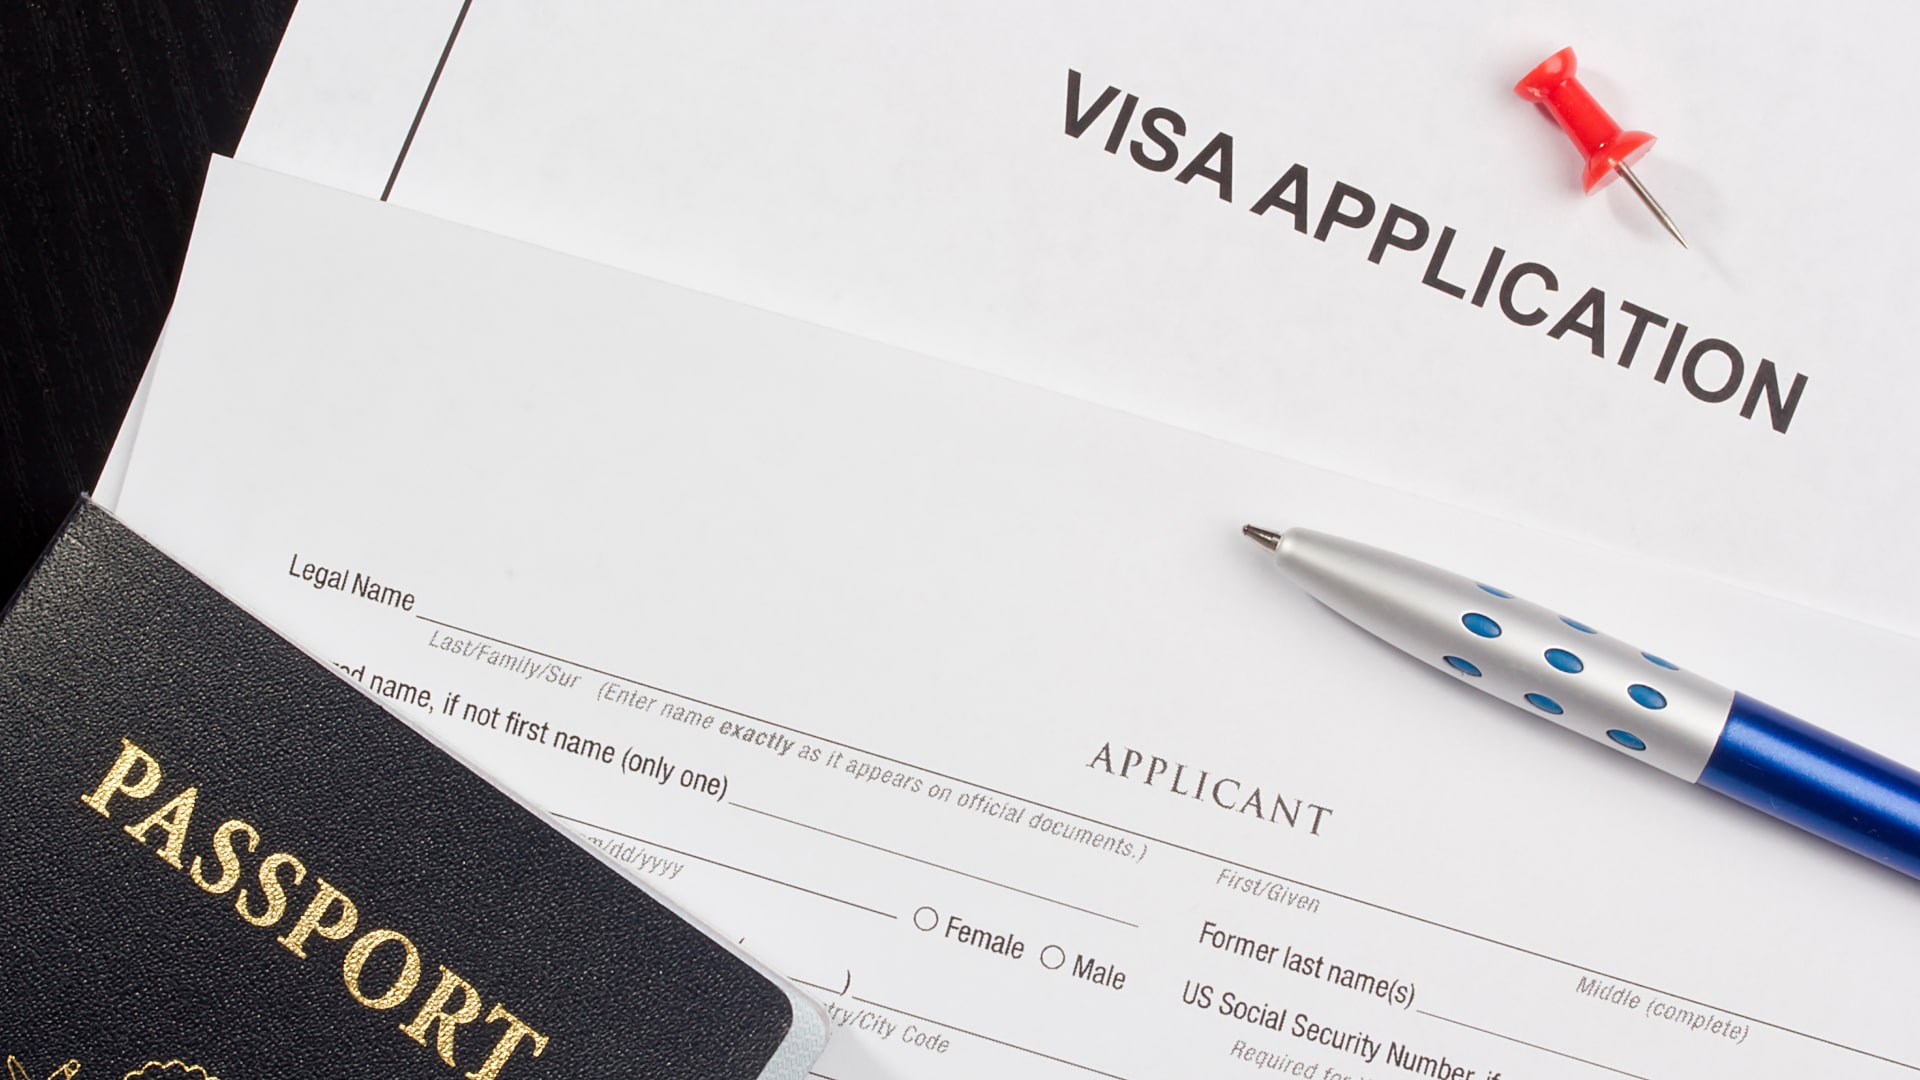 american citizen has no right to court review of husbands visa application